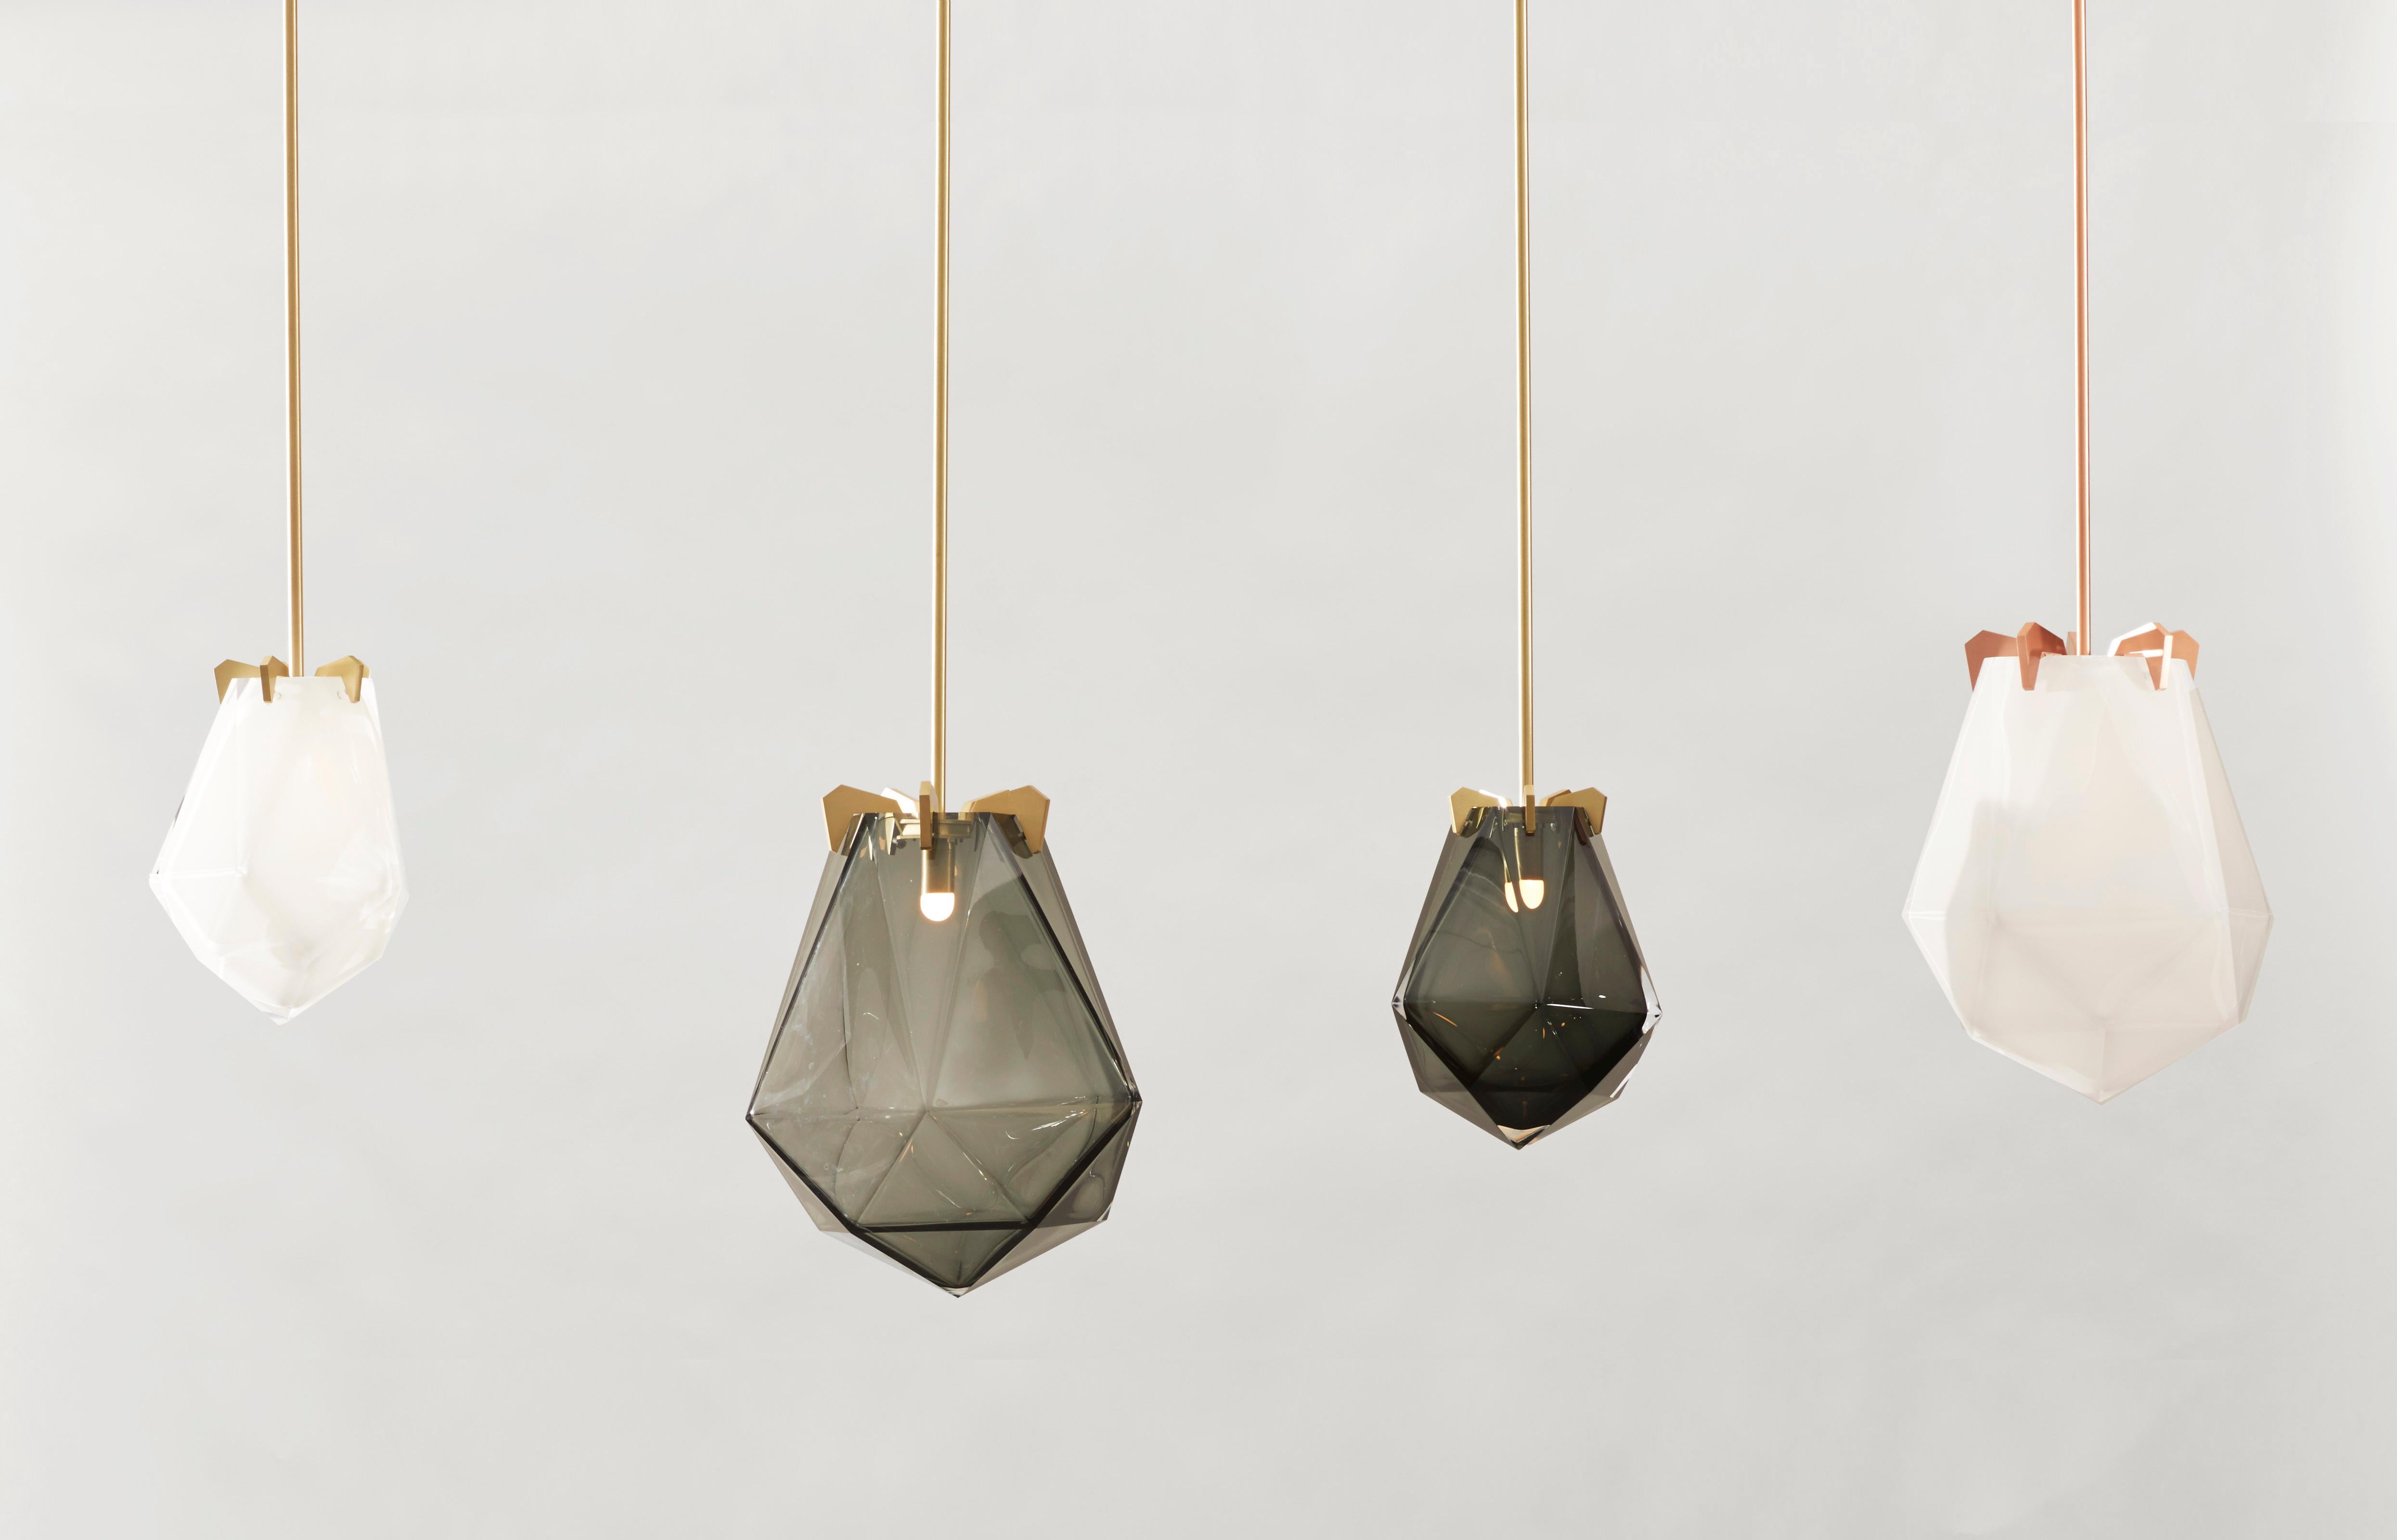 Named for its sharp edges and various facets, the Briolette pendant is available in pendant and flush-mount application. The supporting prongs and signature double-blown glass are available in various tones and finishes.